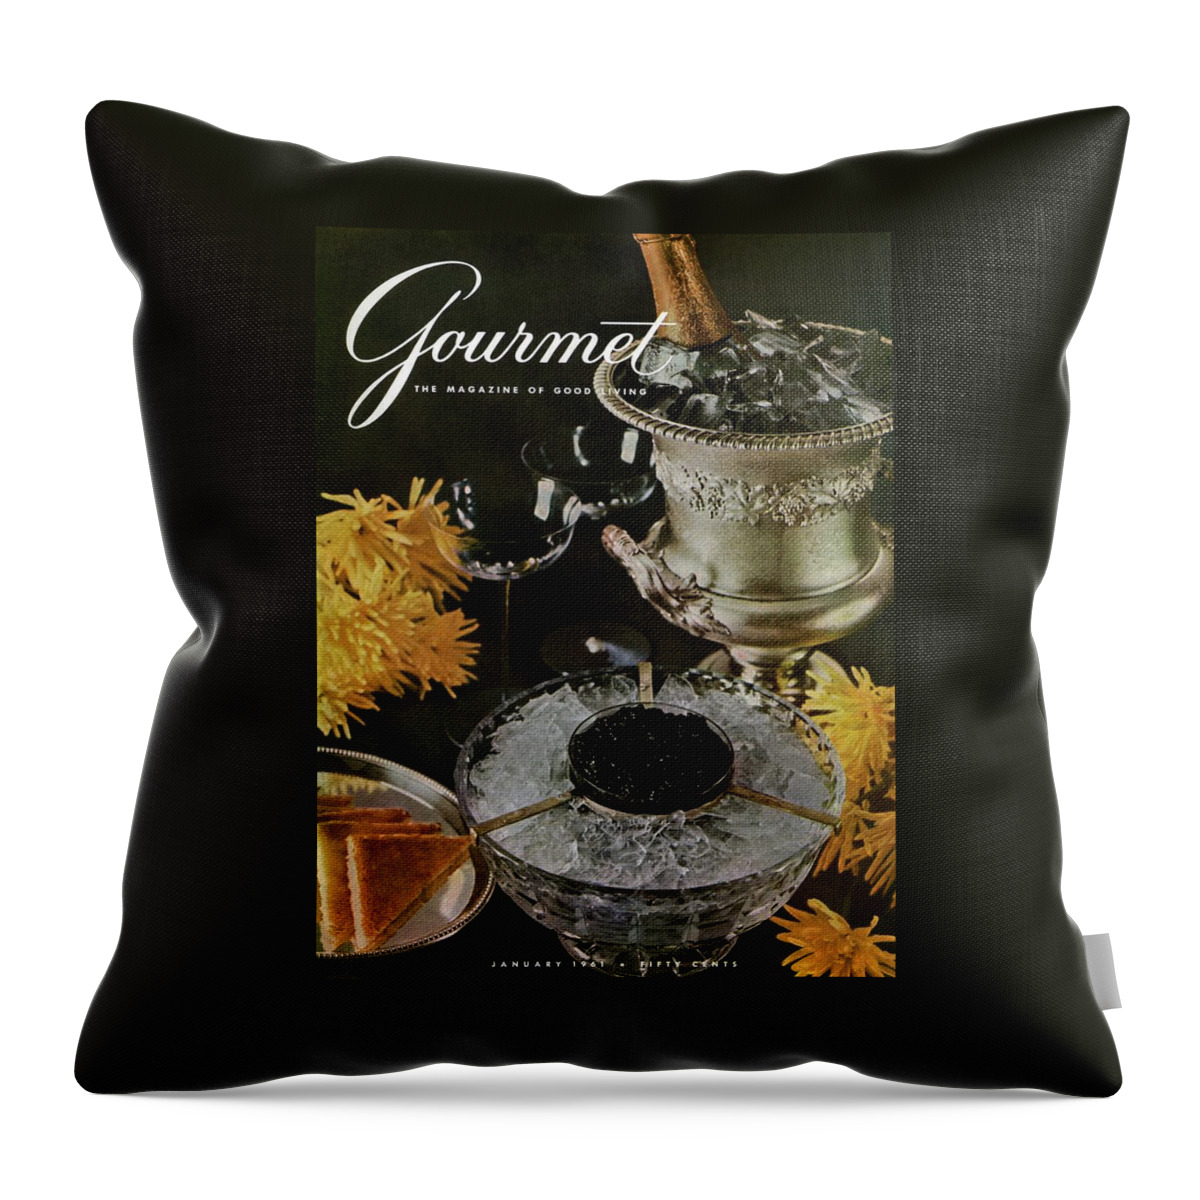 Gourmet Cover Featuring A Wine Cooler Throw Pillow